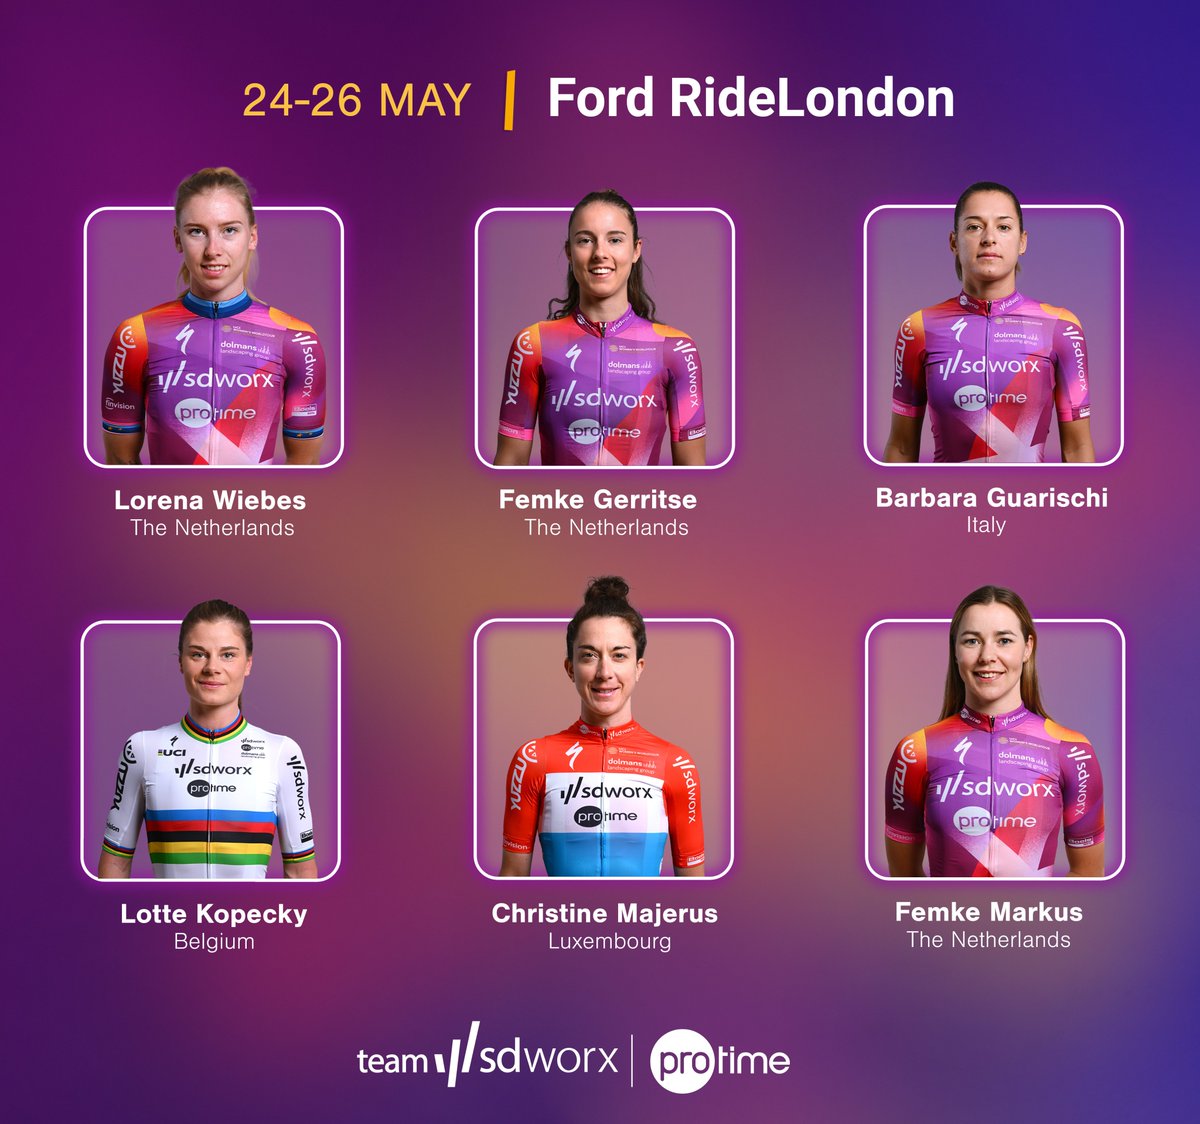 Our line-up for Ford @RideLondon 'The lead-out is here on full strength', says @lorenawiebes, who won all 3 stages of @RideLondon on her last participation in 2022. 'I'm looking forward to race with @LotteKopecky, we make each other stronger. This season my goal is clear: to